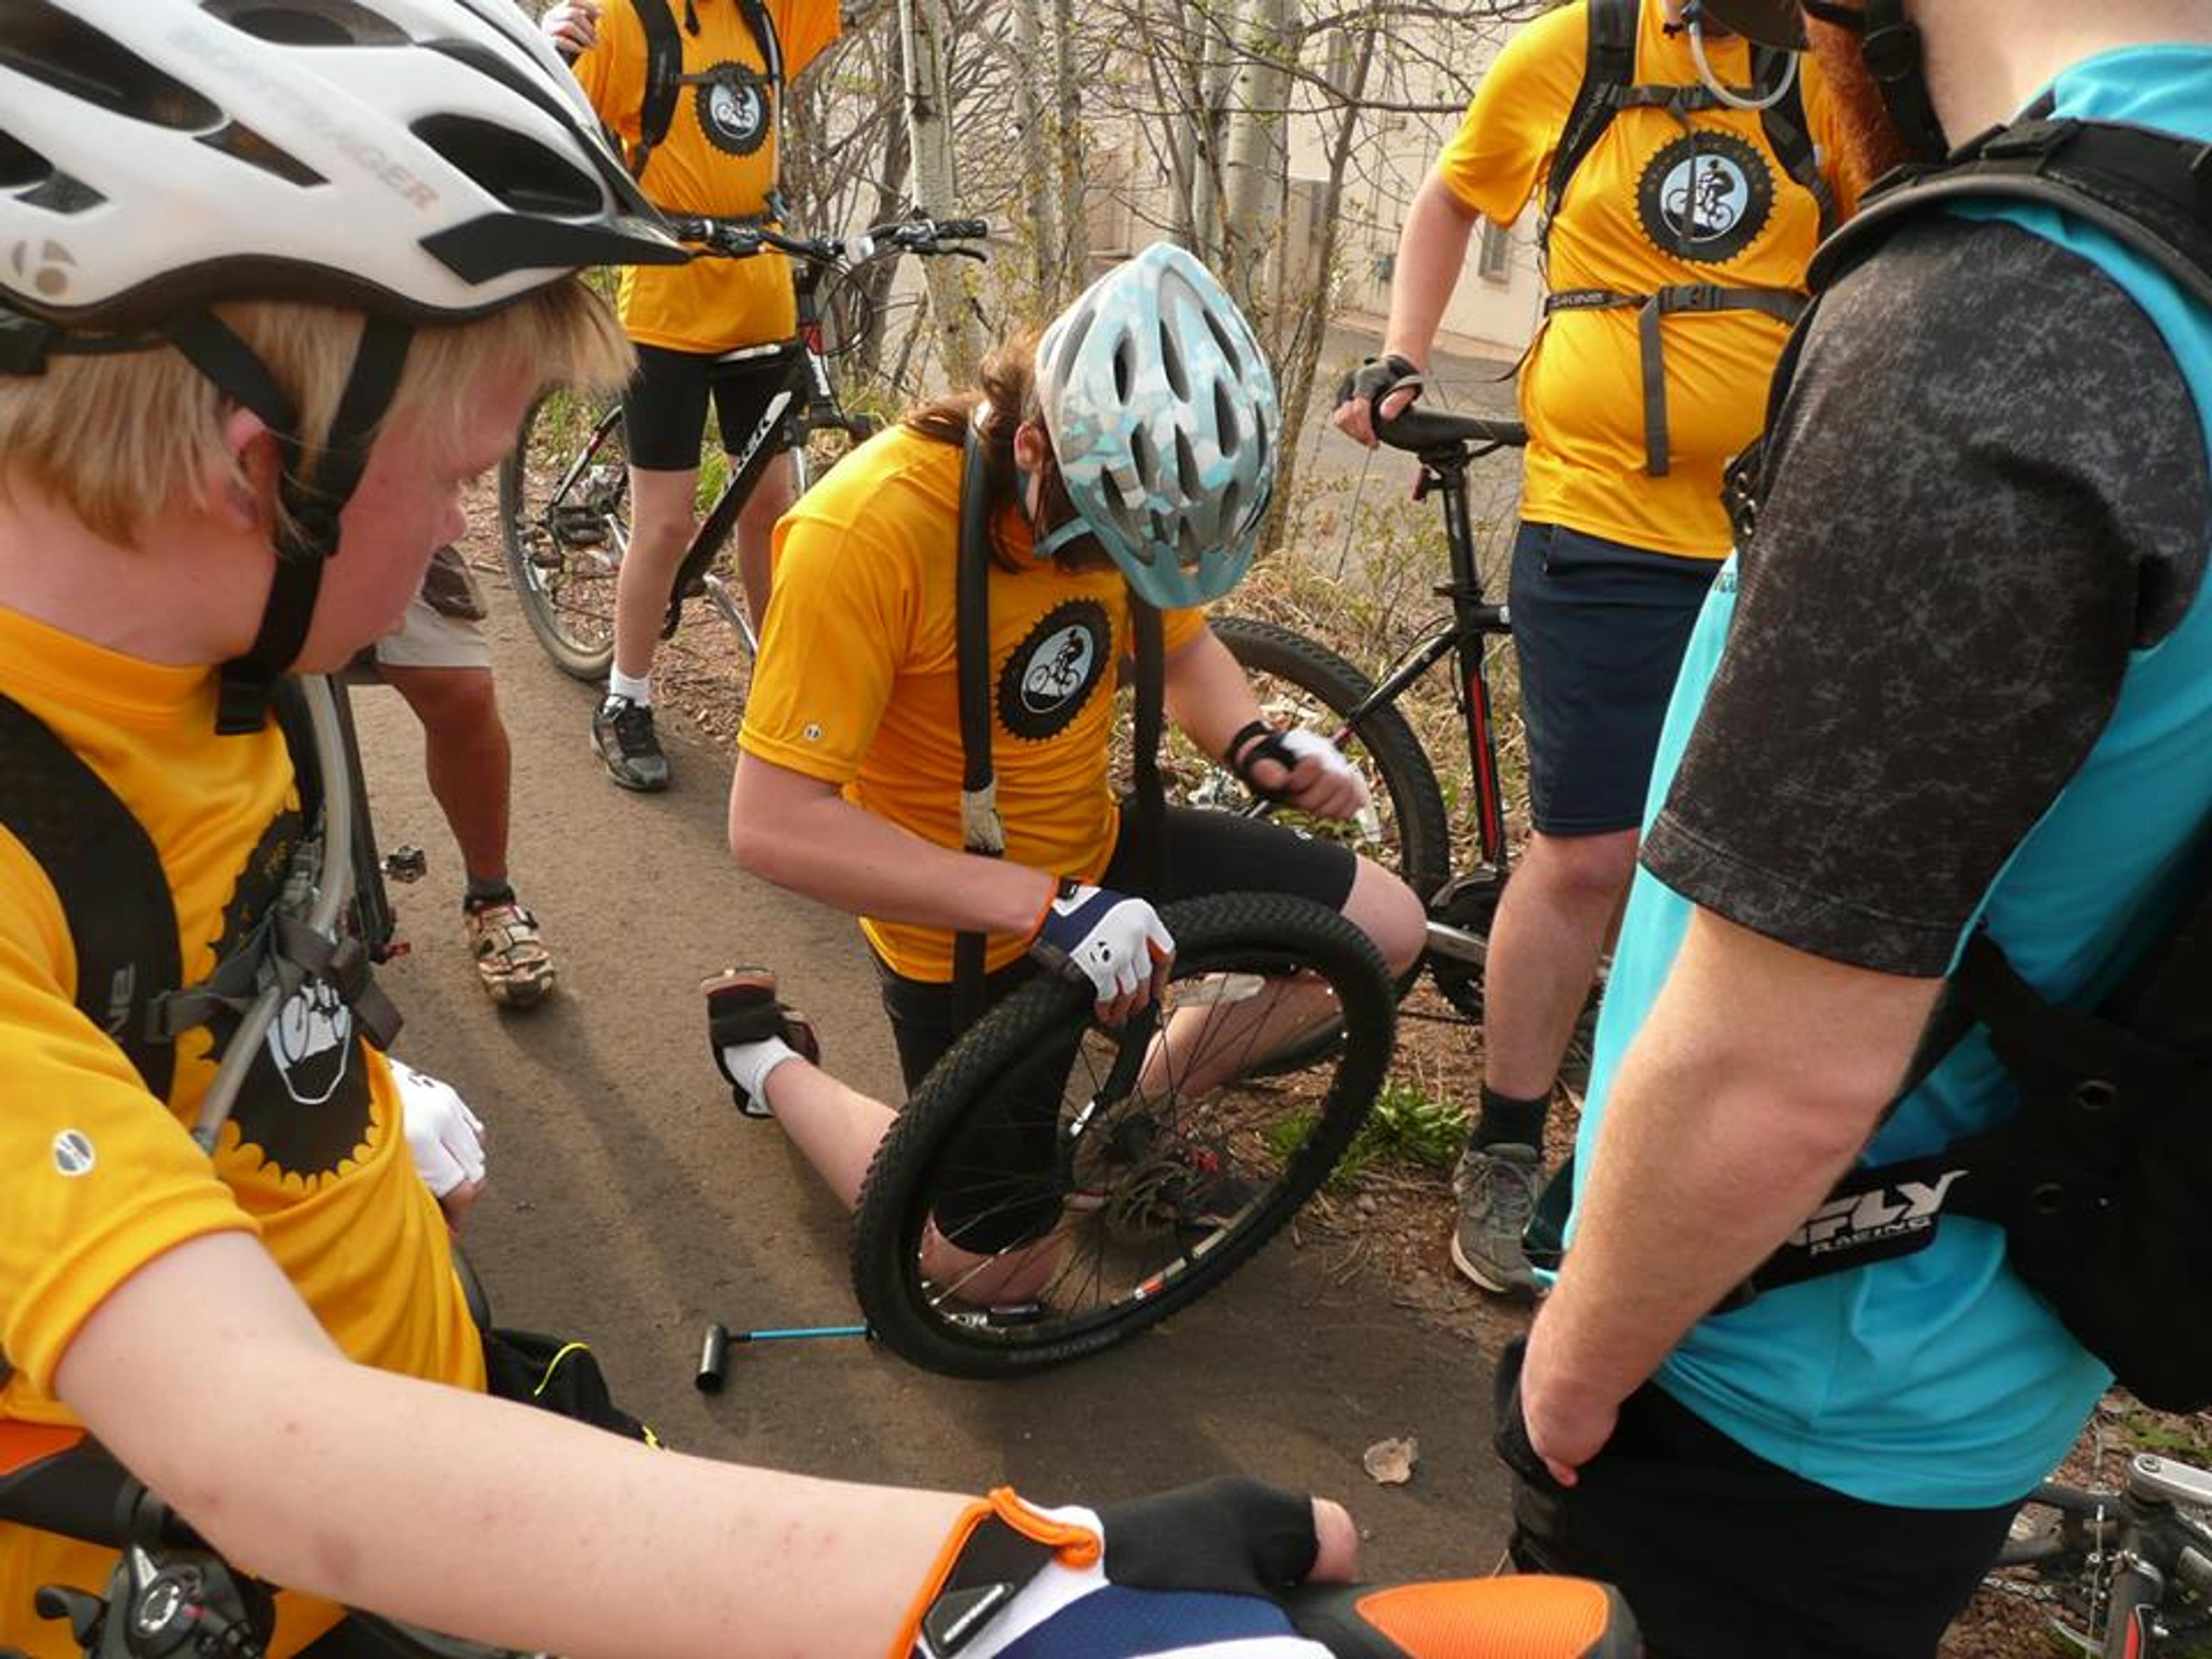 Bike repair and maintenance skills are learned by Start the Cycle participants.